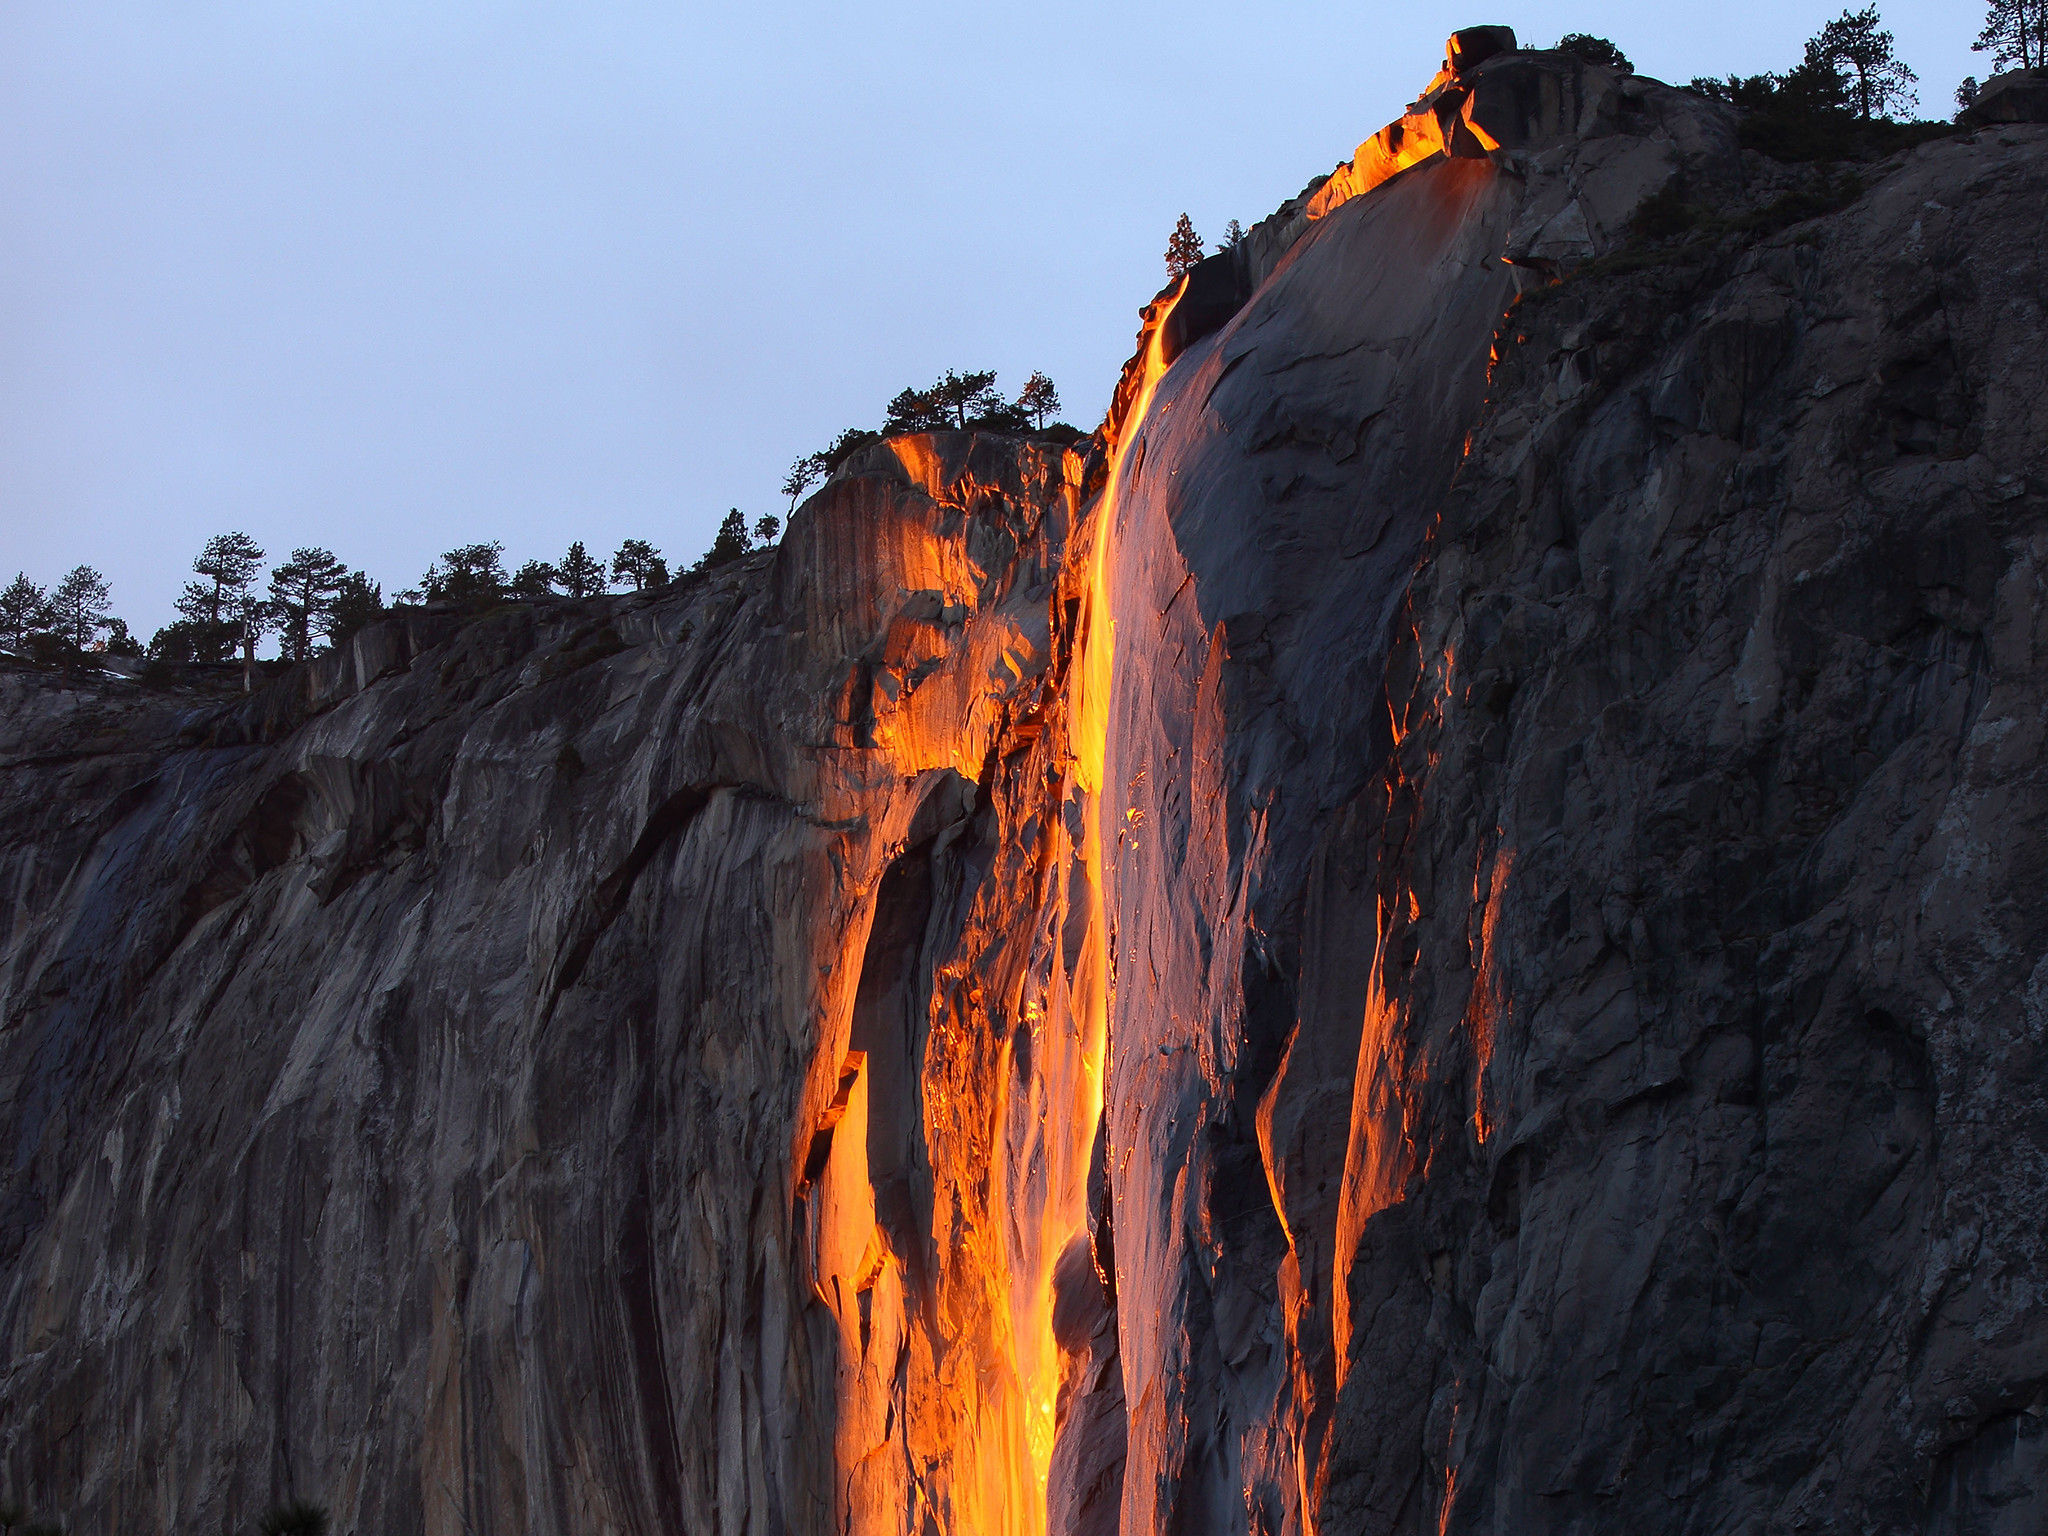 2048x1536 Yosemite's 'Firefall' Is a Gorgeous February Tradition - CondÃ© Nast Traveler